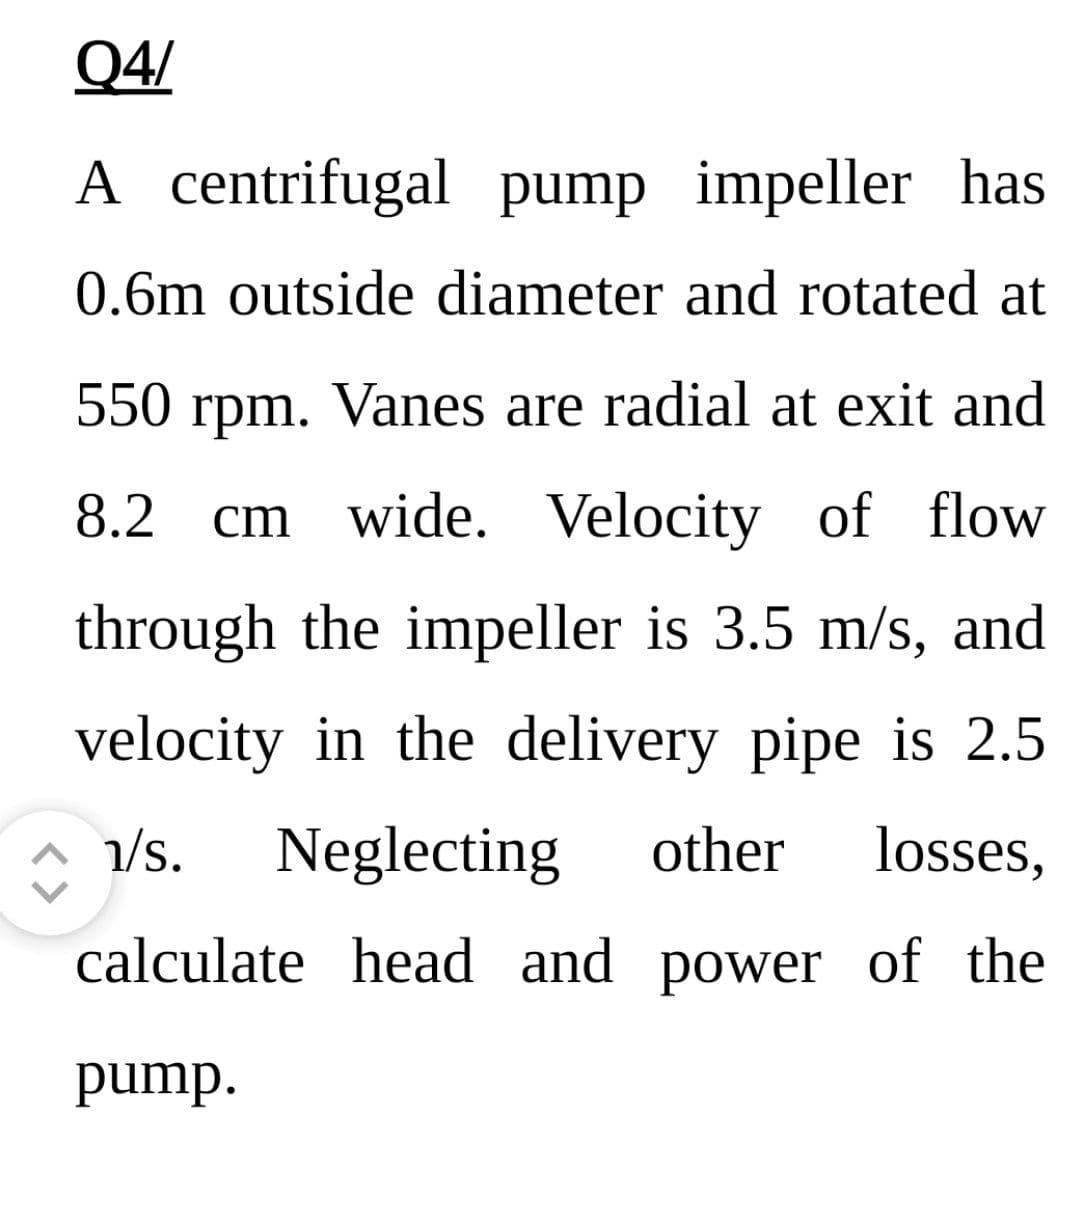 Q4/
A centrifugal pump impeller has
0.6m outside diameter and rotated at
550 rpm. Vanes are radial at exit and
8.2 cm wide. Velocity of flow
through the impeller is 3.5 m/s, and
velocity in the delivery pipe is 2.5
1/s. Neglecting other losses,
calculate head and power of the
pump.